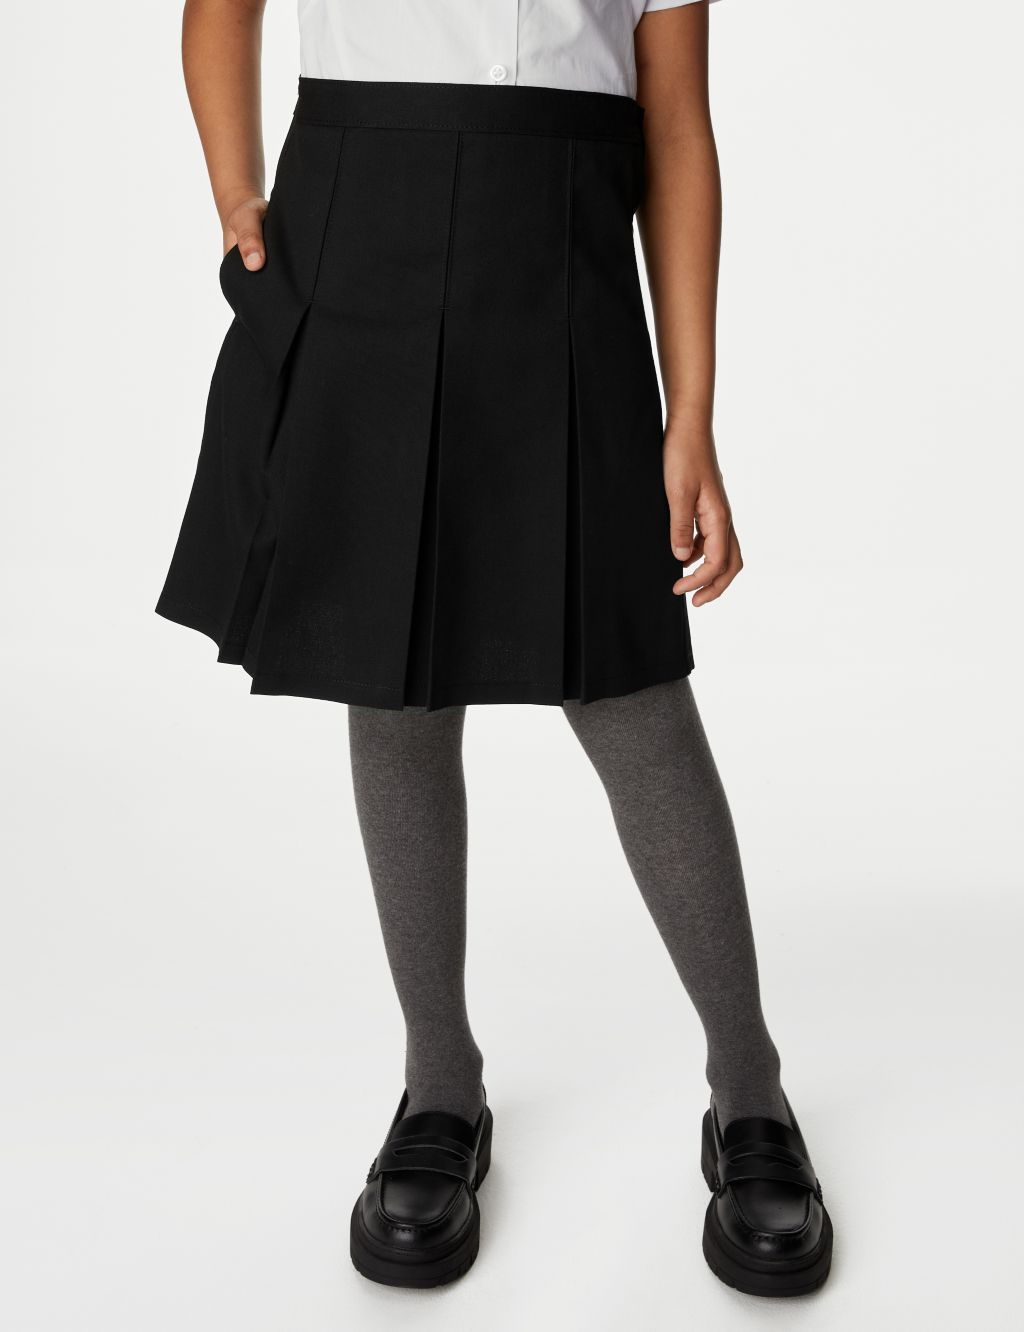 Black School Skirts Available at M&S